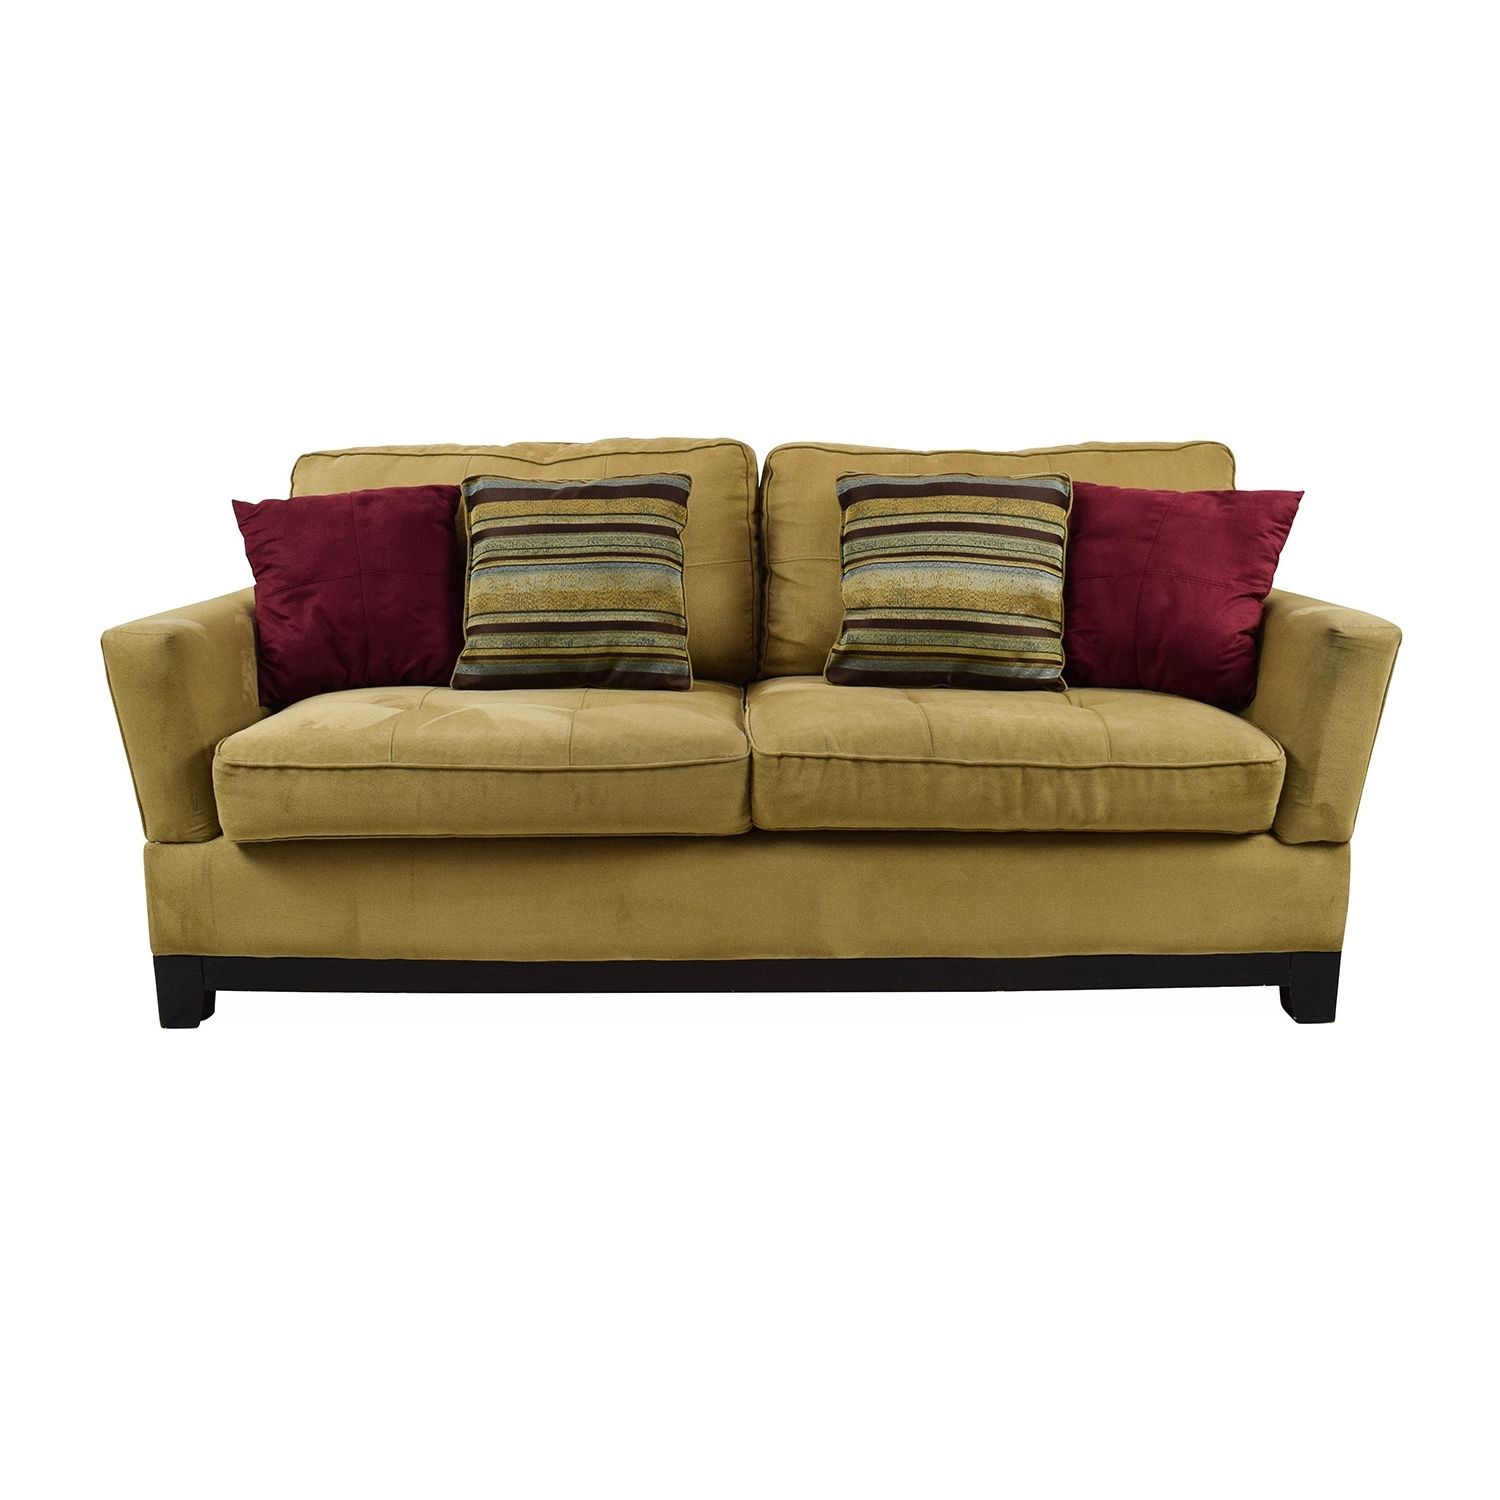 [%78% Off – Jennifer Convertibles Jennifer Convertibles Tan Sofa / Sofas With Regard To Most Up To Date Jennifer Convertibles Sectional Sofas|jennifer Convertibles Sectional Sofas Throughout Most Recently Released 78% Off – Jennifer Convertibles Jennifer Convertibles Tan Sofa / Sofas|latest Jennifer Convertibles Sectional Sofas Intended For 78% Off – Jennifer Convertibles Jennifer Convertibles Tan Sofa / Sofas|preferred 78% Off – Jennifer Convertibles Jennifer Convertibles Tan Sofa / Sofas In Jennifer Convertibles Sectional Sofas%] (View 9 of 20)